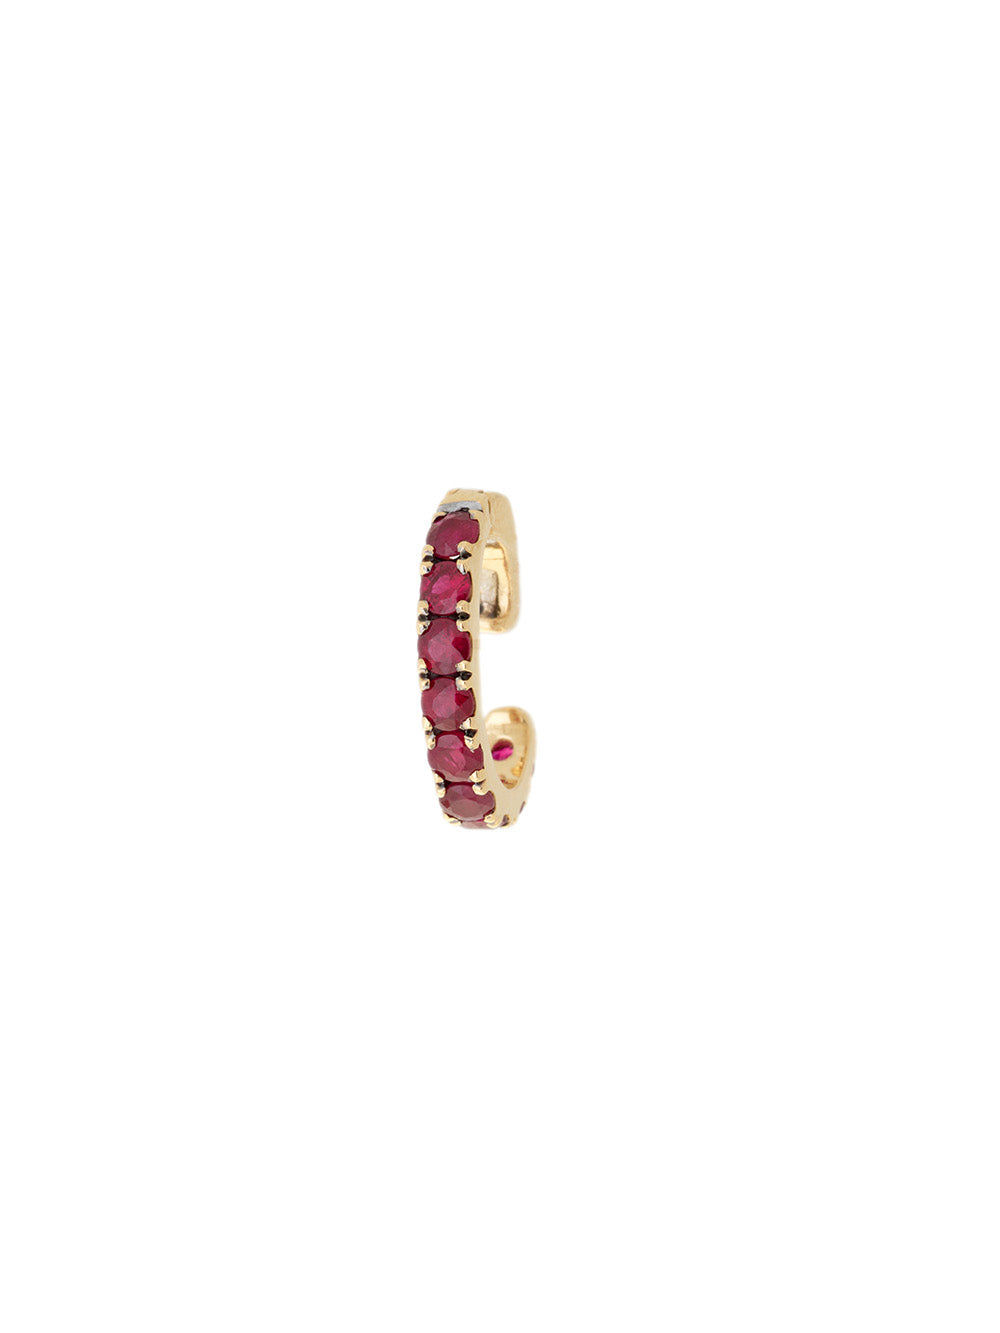 YELLOW GOLD AND RUBY CUFF EARRING